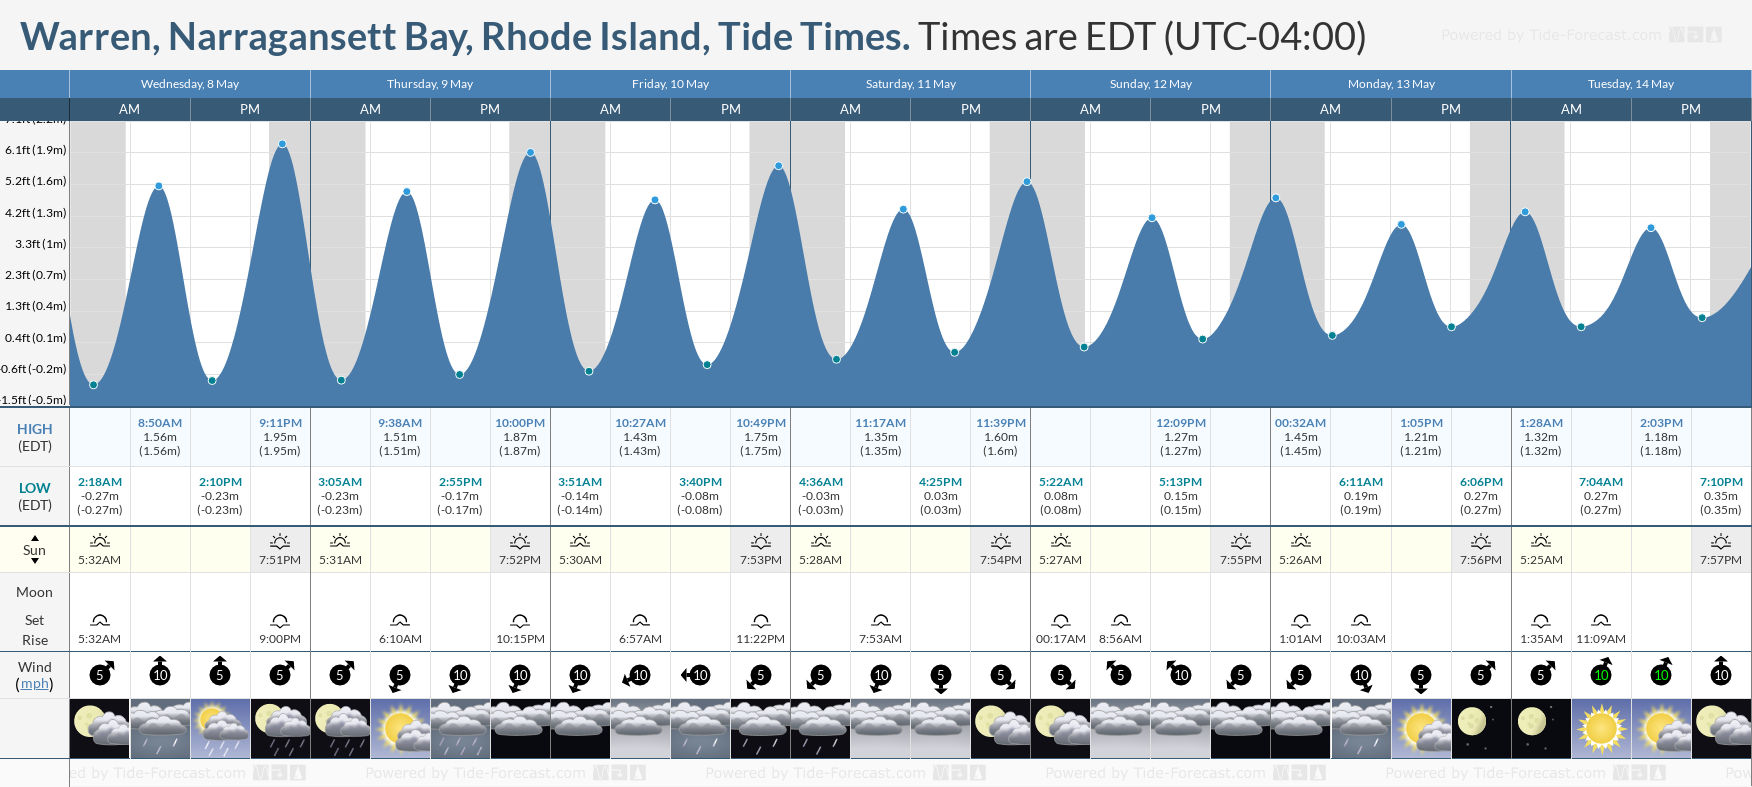 Warren, Narragansett Bay, Rhode Island Tide Chart including high and low tide tide times for the next 7 days